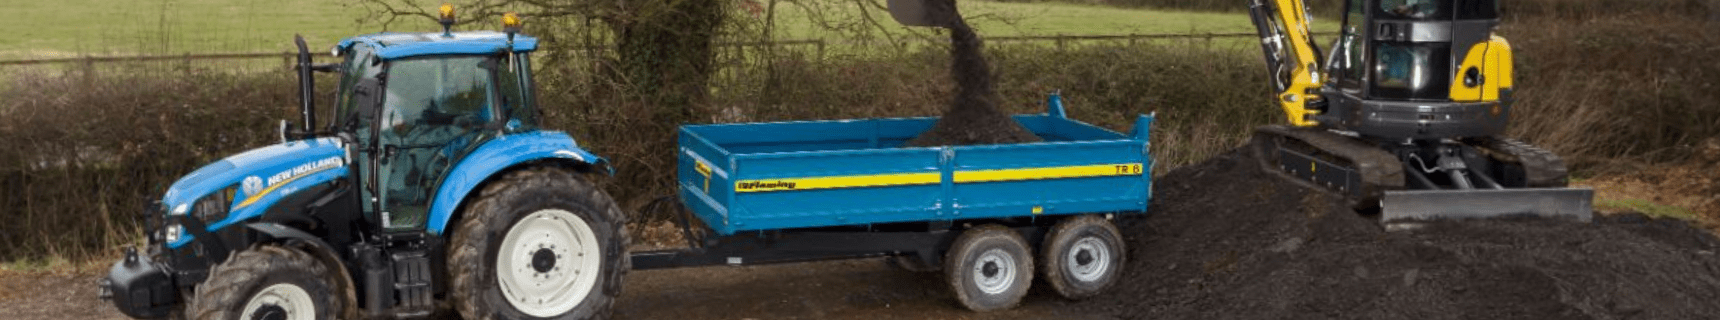 Fleming Tipping and Monoque Trailers – 16 Ton Grain Trailer Head Image